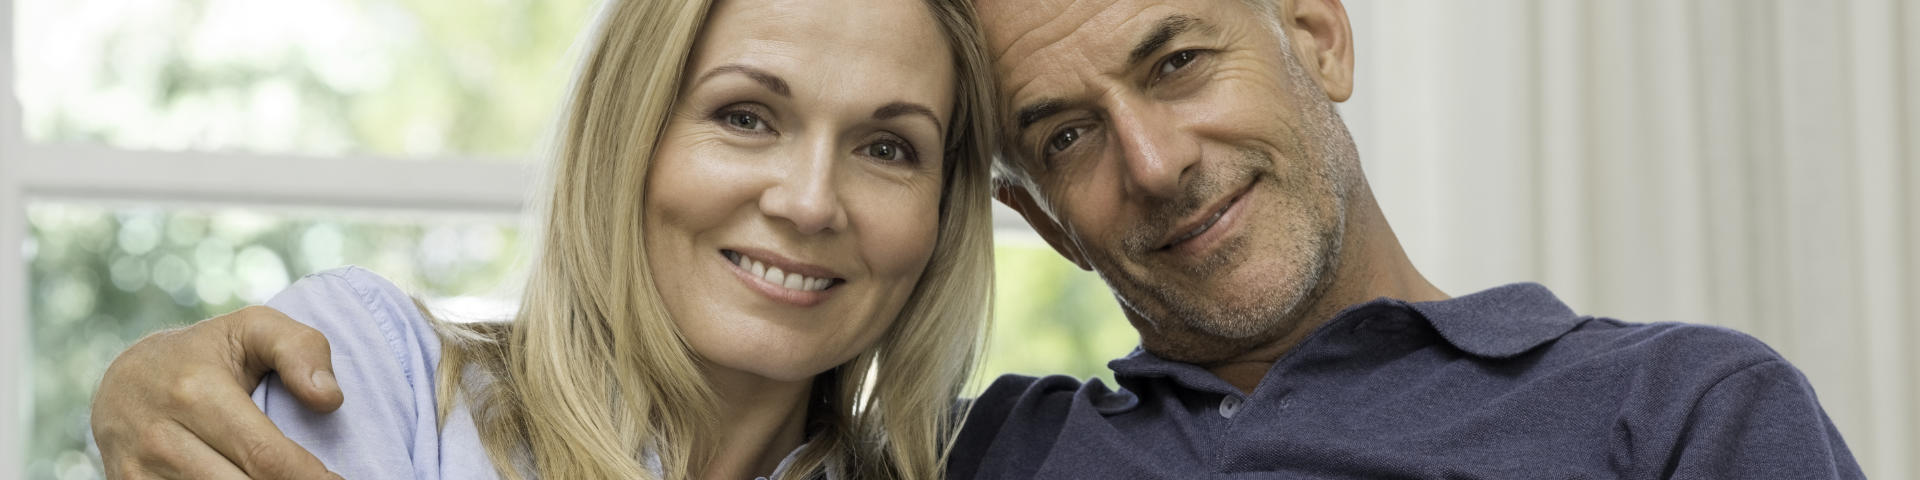 Happy middle-aged couple showing perfect teeth in their smiles.